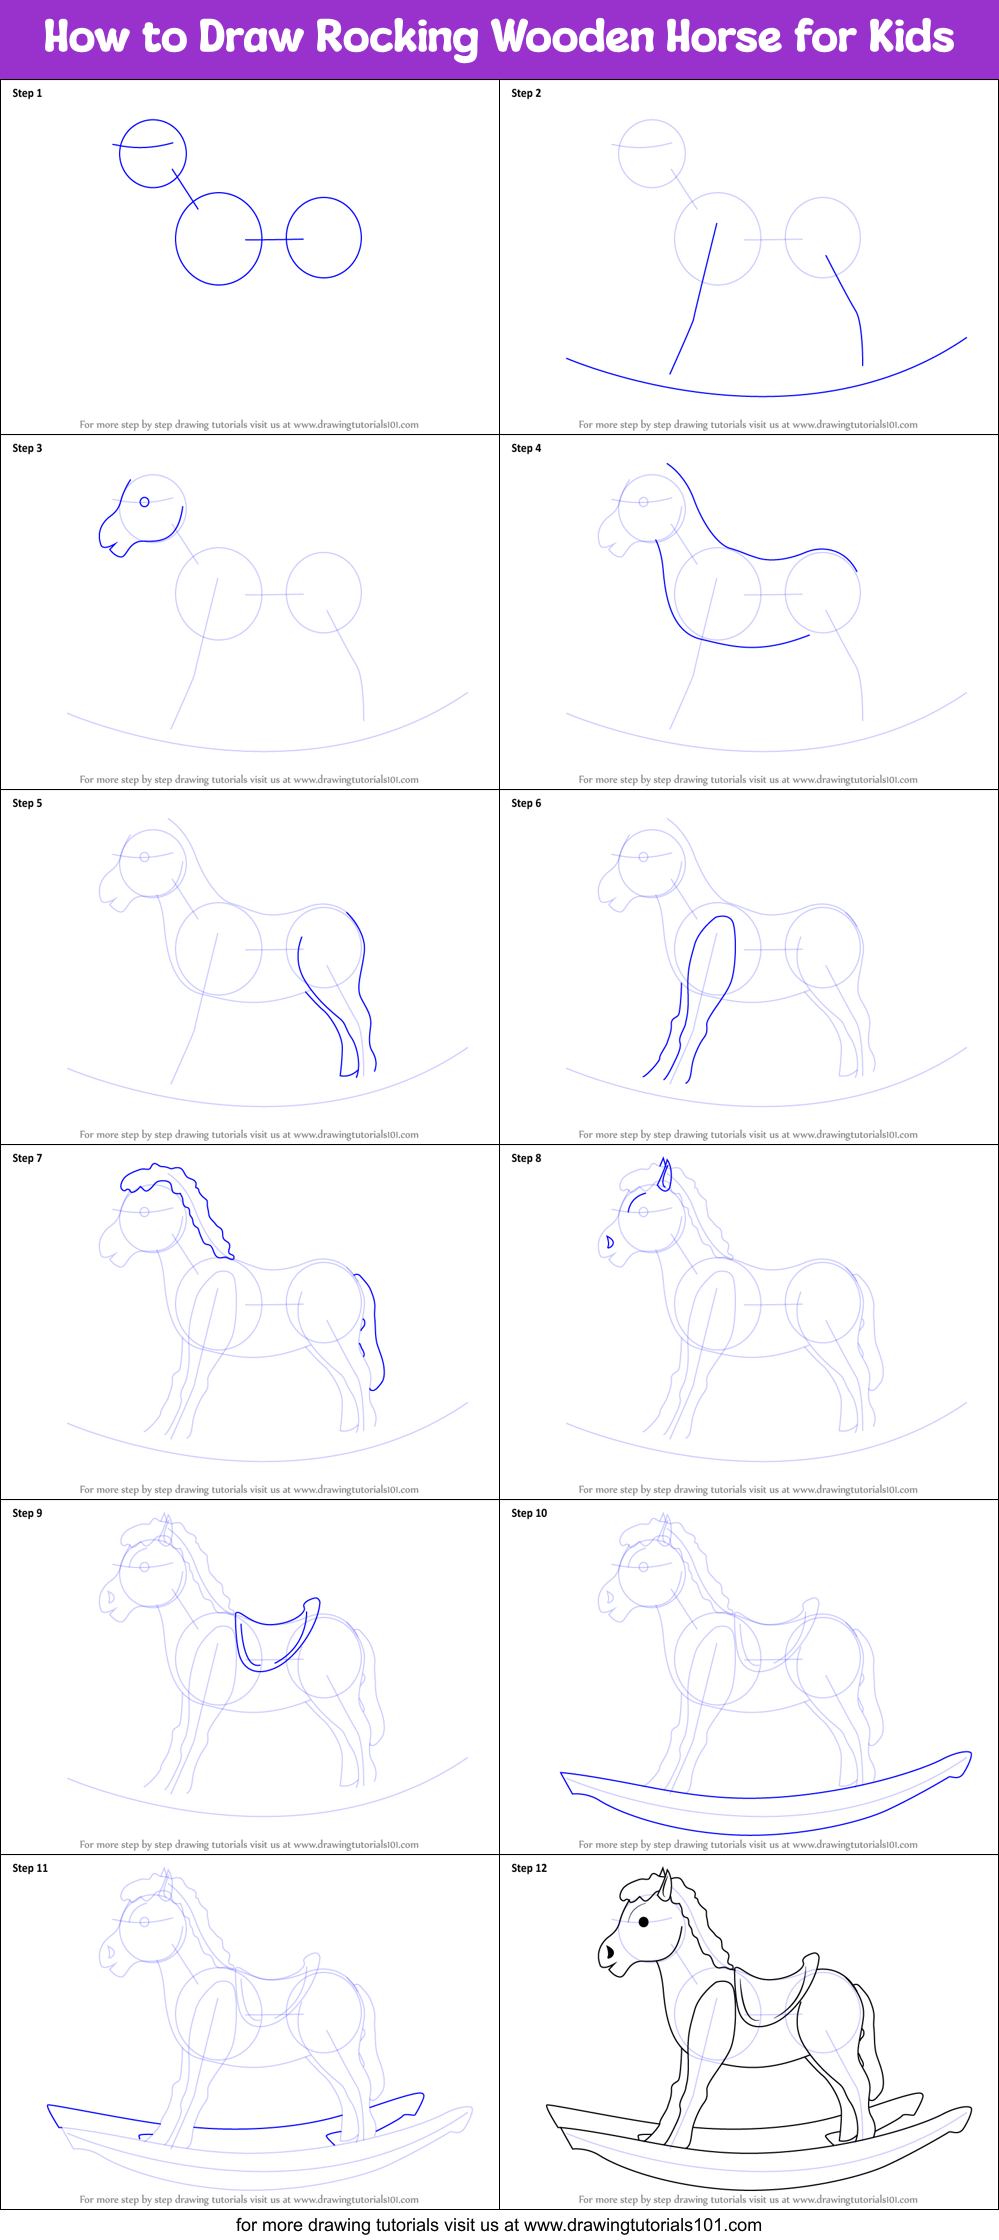 How to Draw Rocking Wooden Horse for Kids printable step by step ...